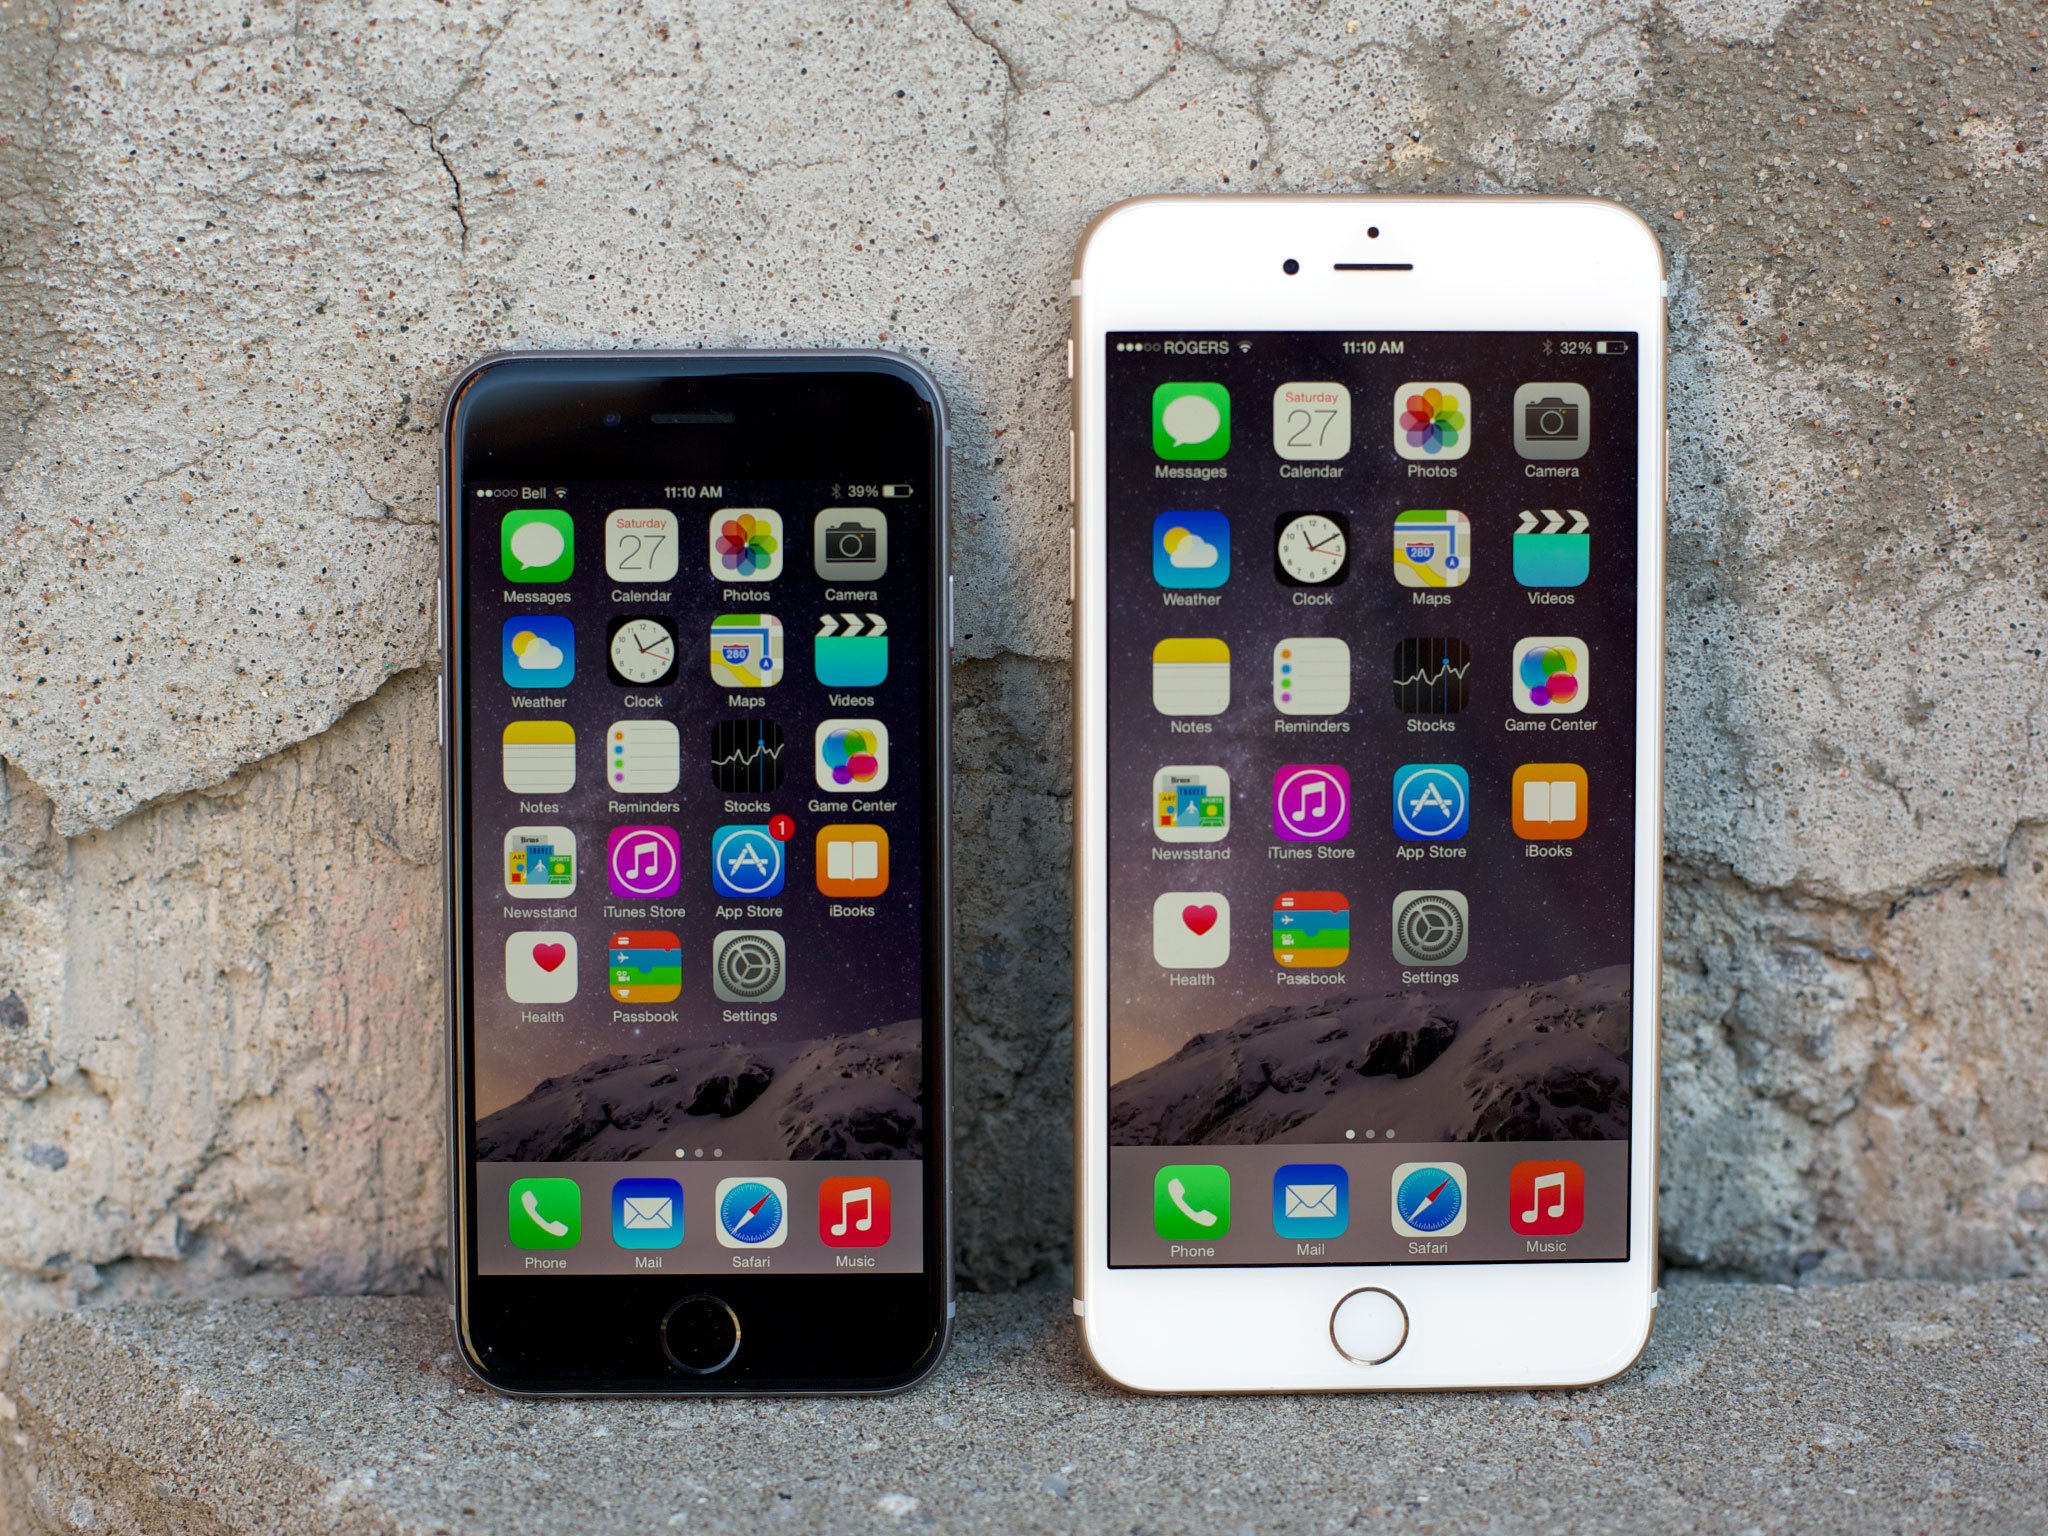 iPhone 6 and iPhone 6 Plus review: Six months later